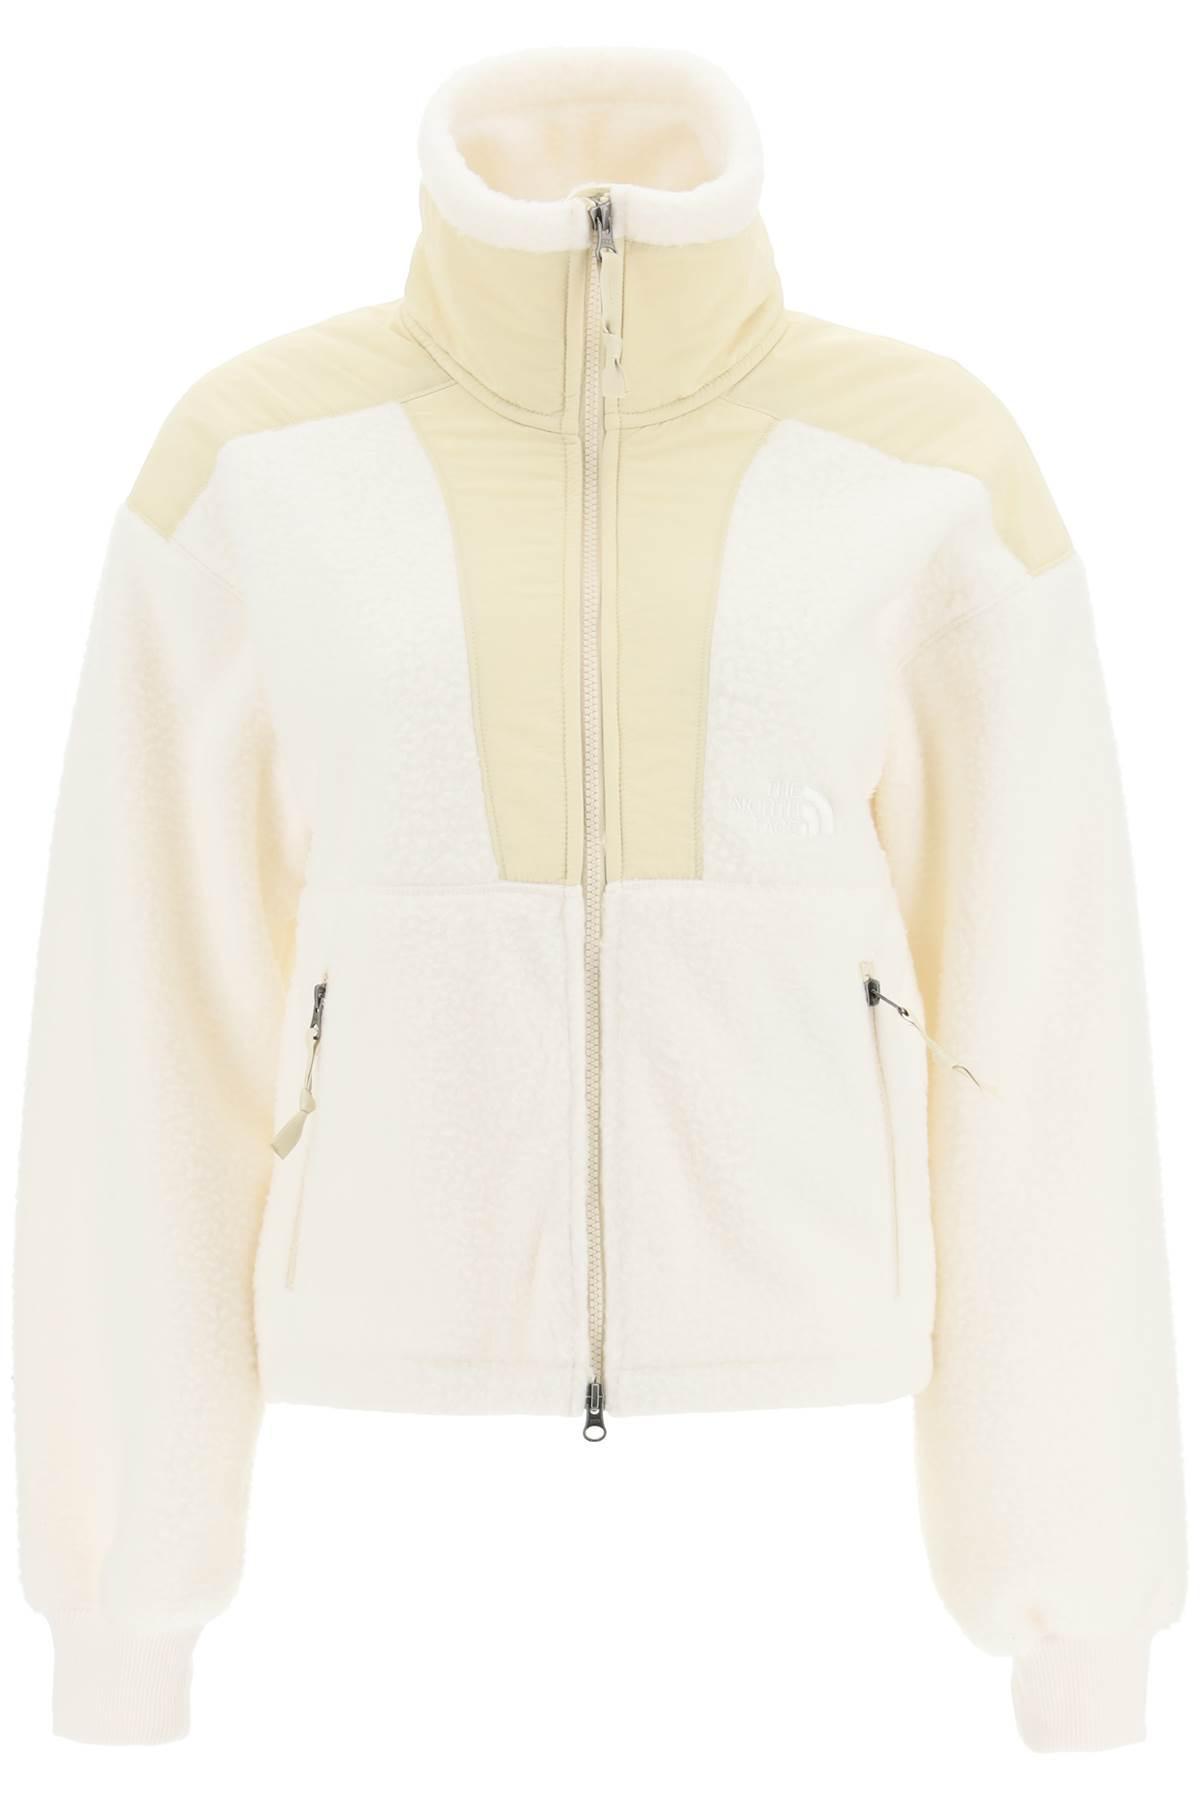 The North Face 'denali' Fleece Jacket in White | Lyst